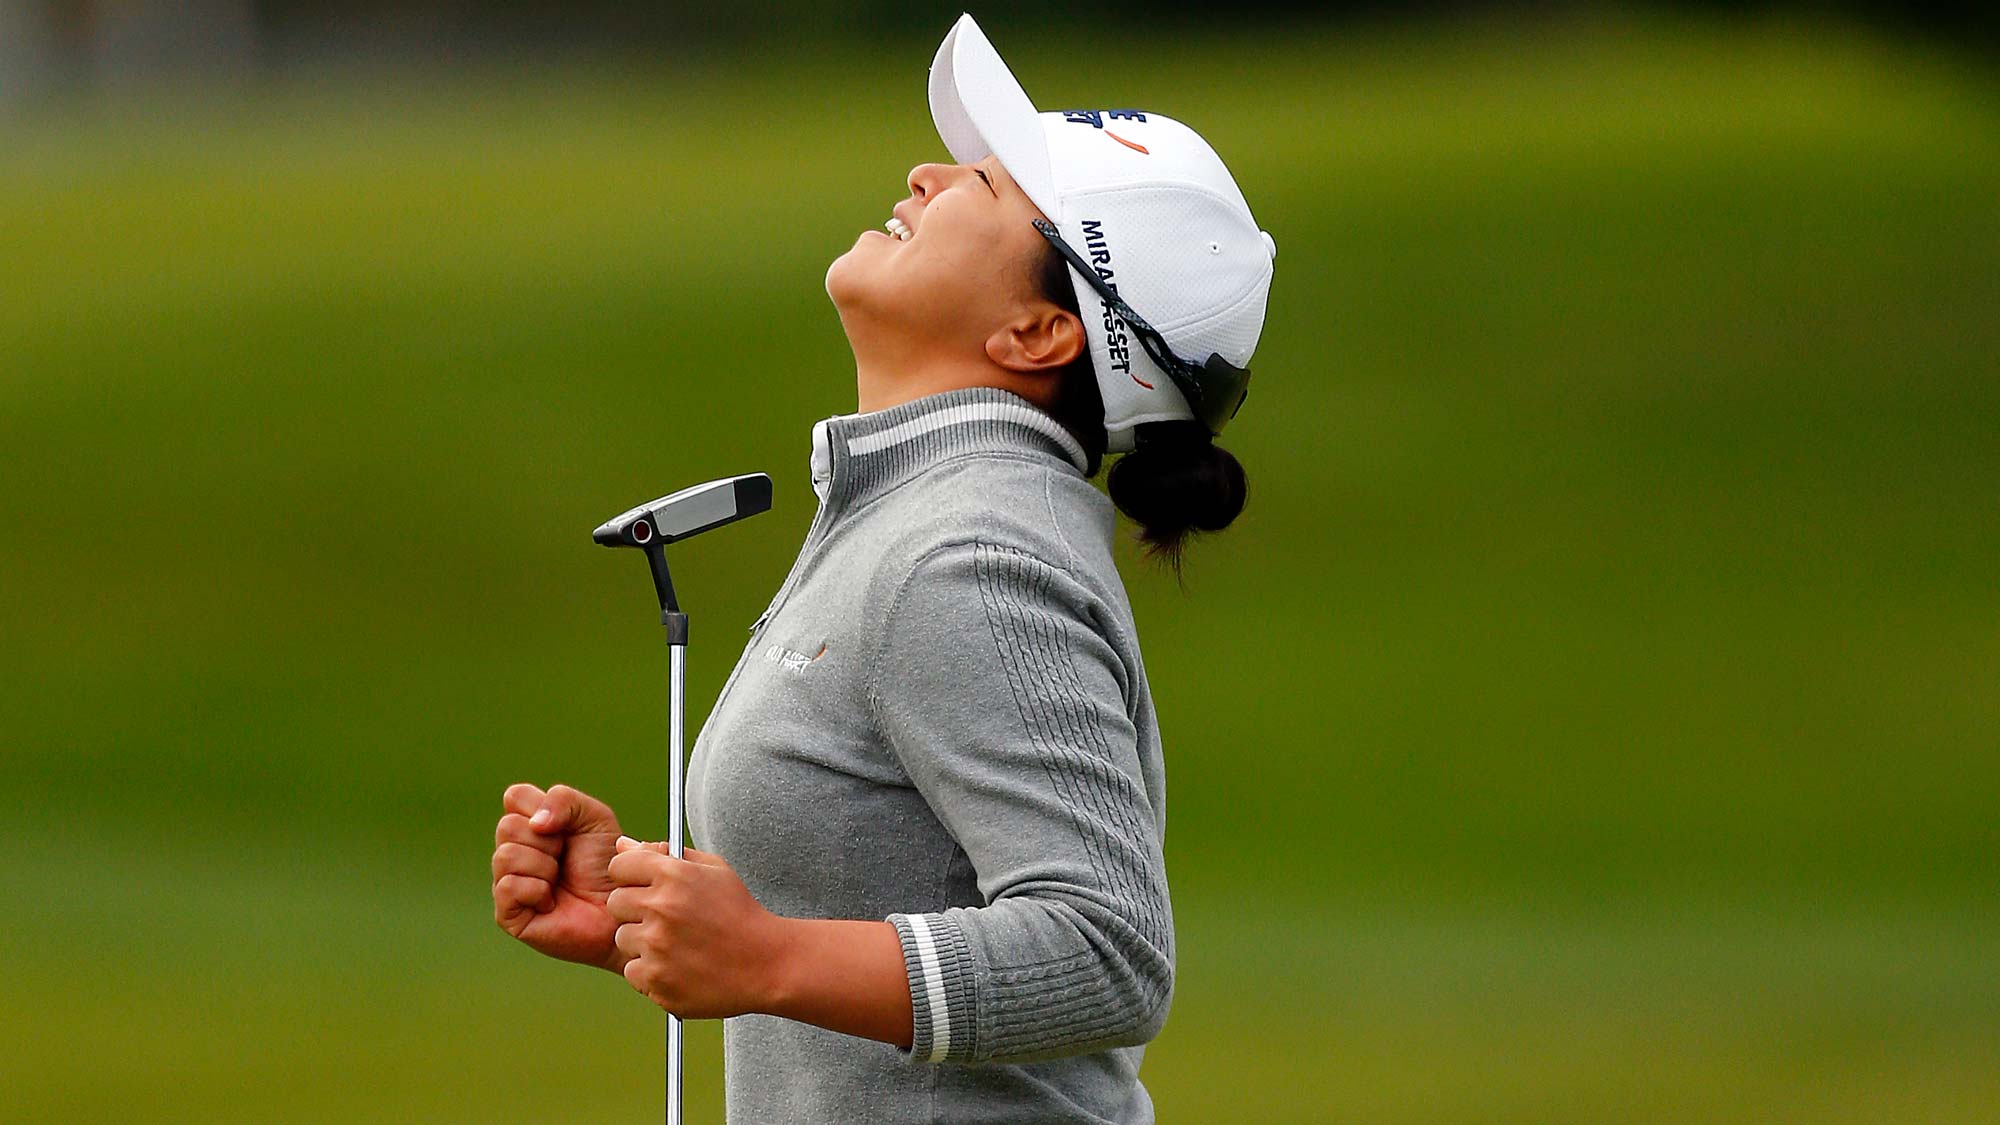 Sei Young Kim of South Korea celebrates making a birdie putt in a sudden death playoff to win during the final round of the LPGA Mediheal Championship